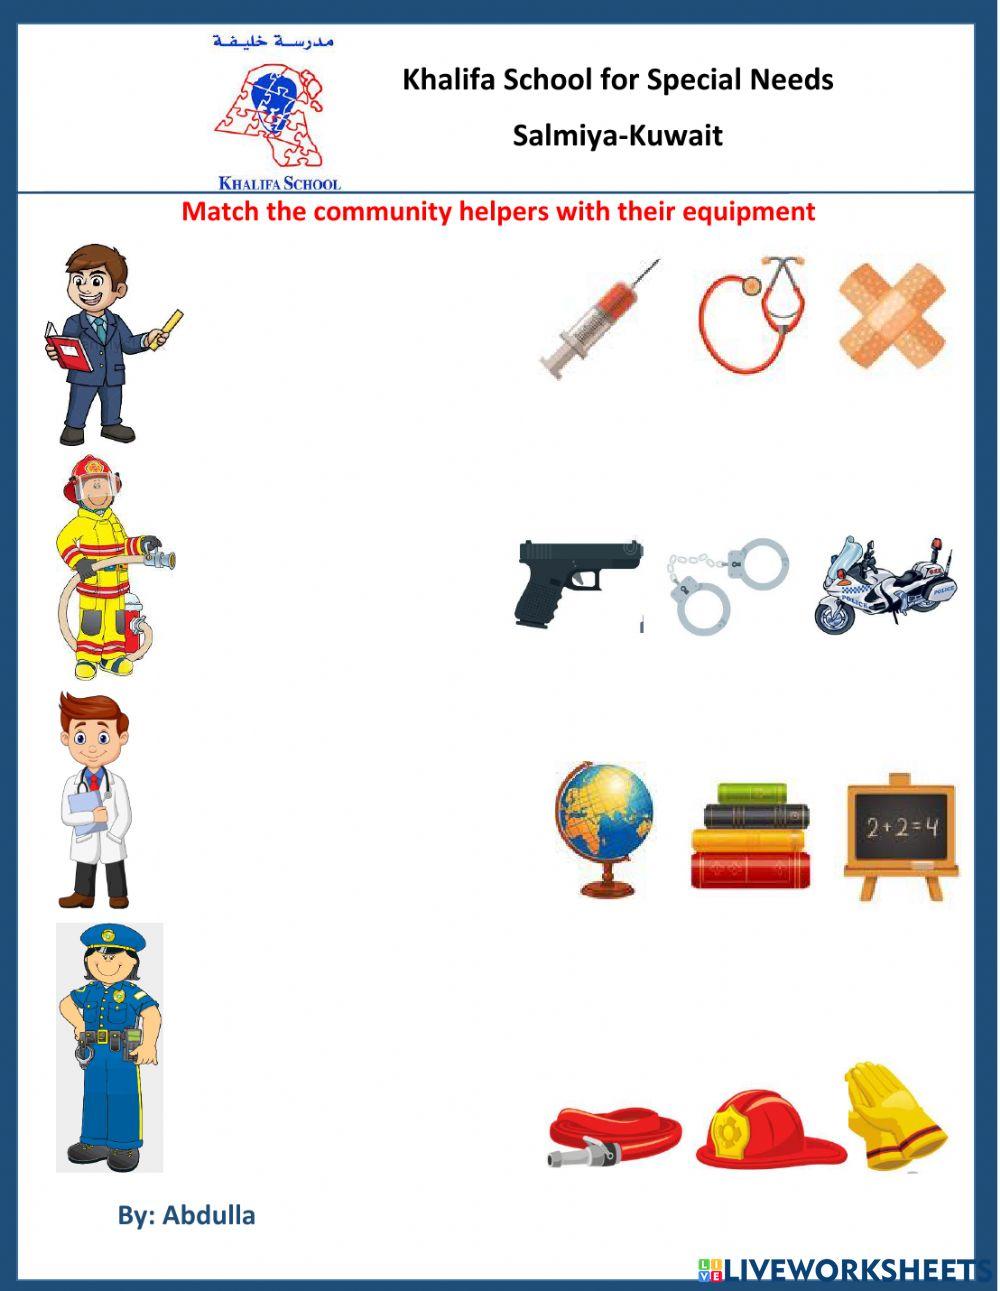 Match the community helpers with their equipments